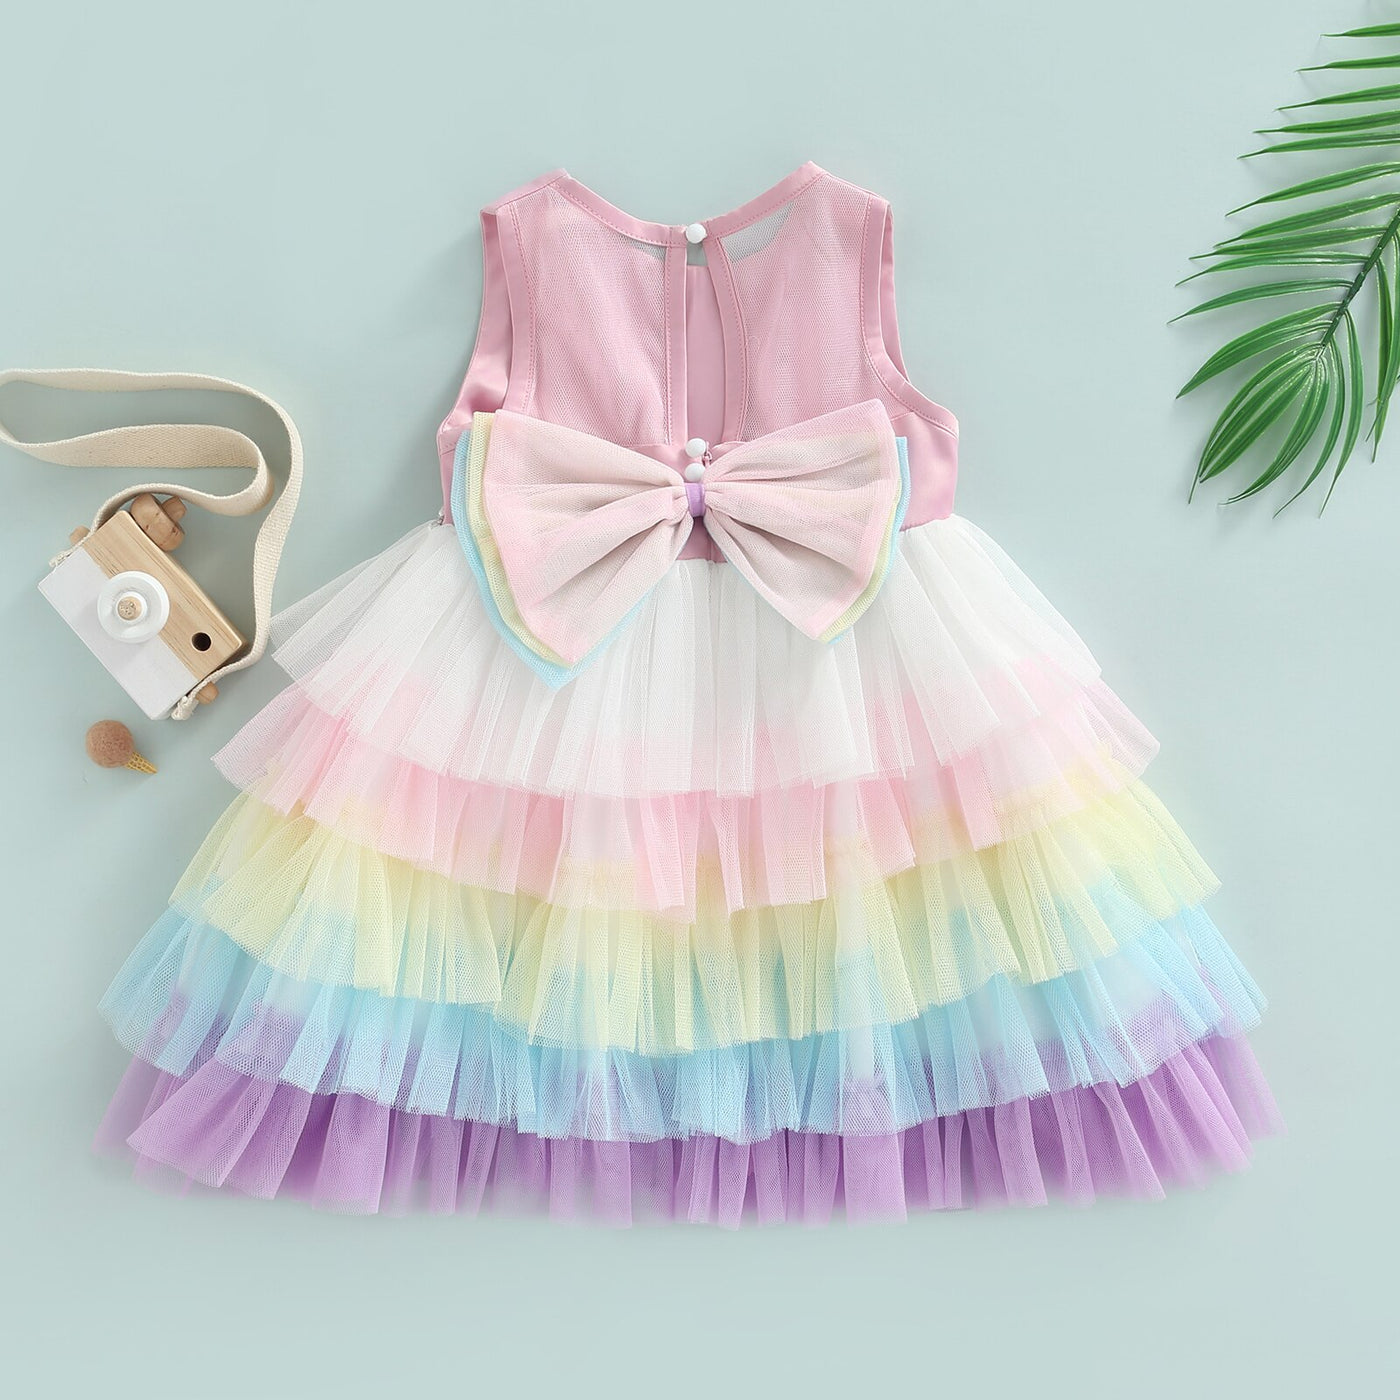 Colorful Tulle 12M-5yrs Dress - Coco Potato - dresses and partywear for little girls